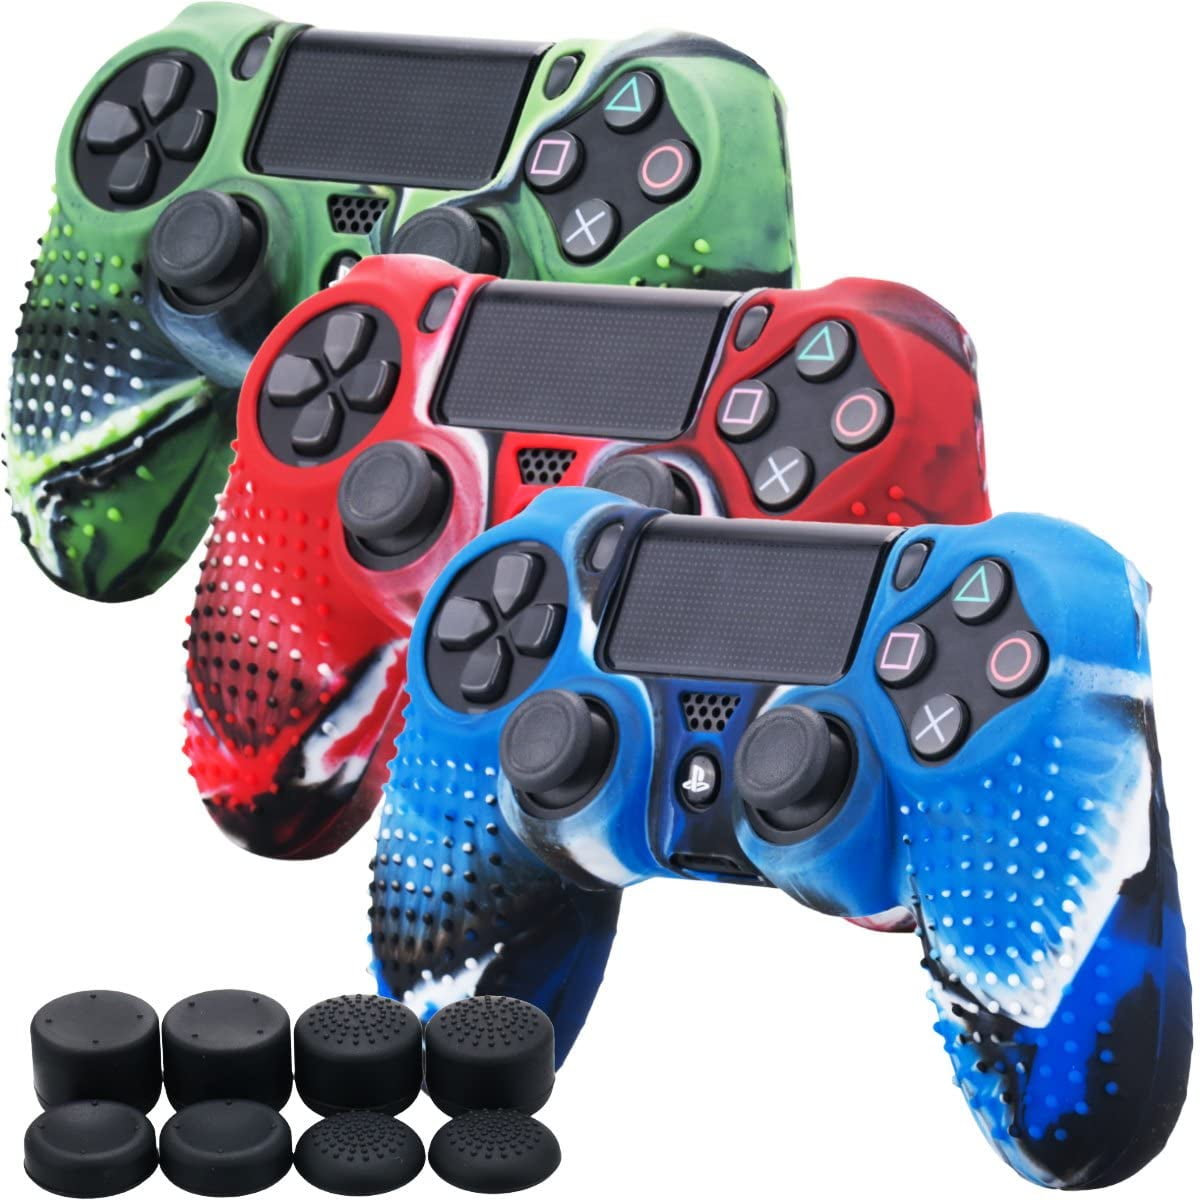 Silicone Rubber Cover Skin Case X 3 Anti-slip STUDDED Dots Customize for PS4/SLIM/PRO Controller x 1(Camouflage Red & Blue & Green) + FPS PRO Stick Cover Thumb Grips x 8